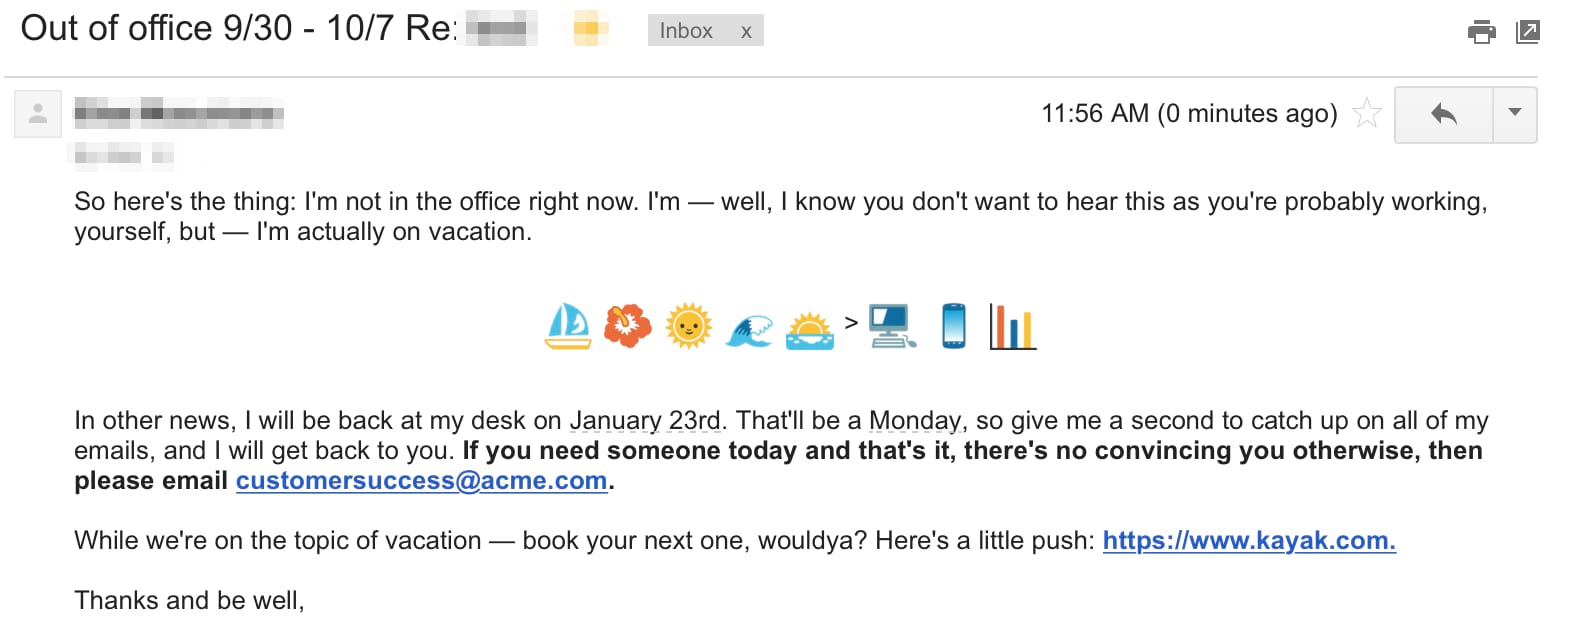 A modern take on automated out of office responses